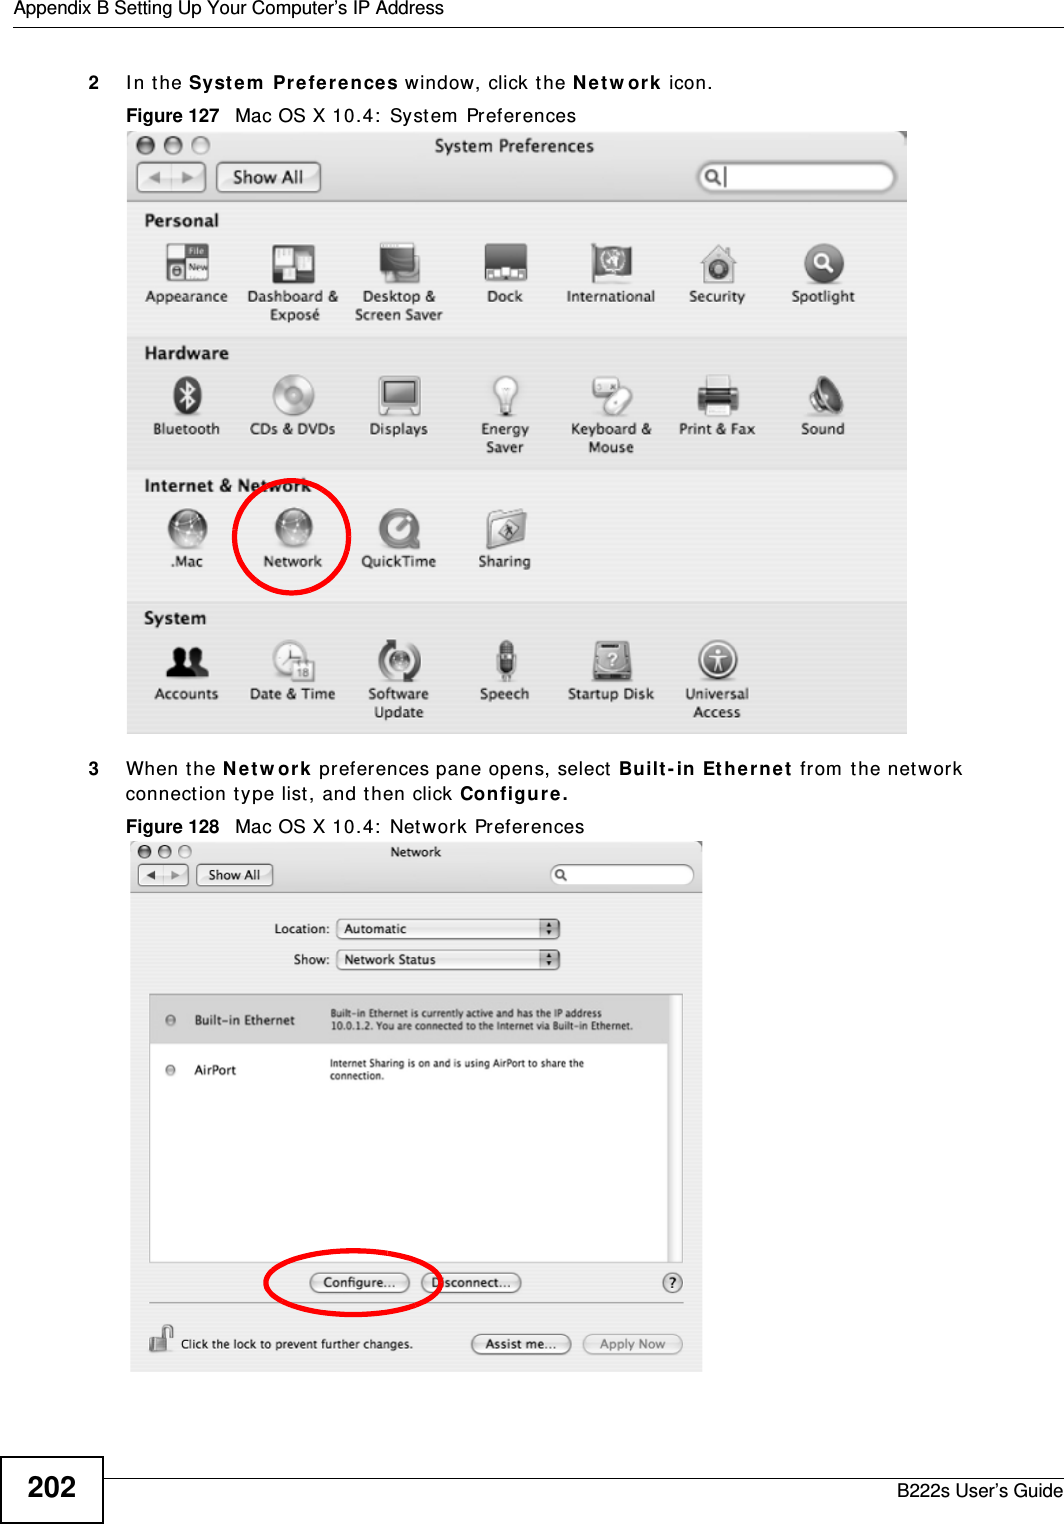 Appendix B Setting Up Your Computer’s IP AddressB222s User’s Guide2022I n t he Syst e m  Preferences w indow, click the N et w or k  icon.Figure 127   Mac OS X 10.4:  System  Preferences3When the N e t w o rk  preferences pane opens, select Built - in  Et he r n e t  from  the network connection t ype list, and t hen click Configure .Figure 128   Mac OS X 10.4:  Network Pr eferences